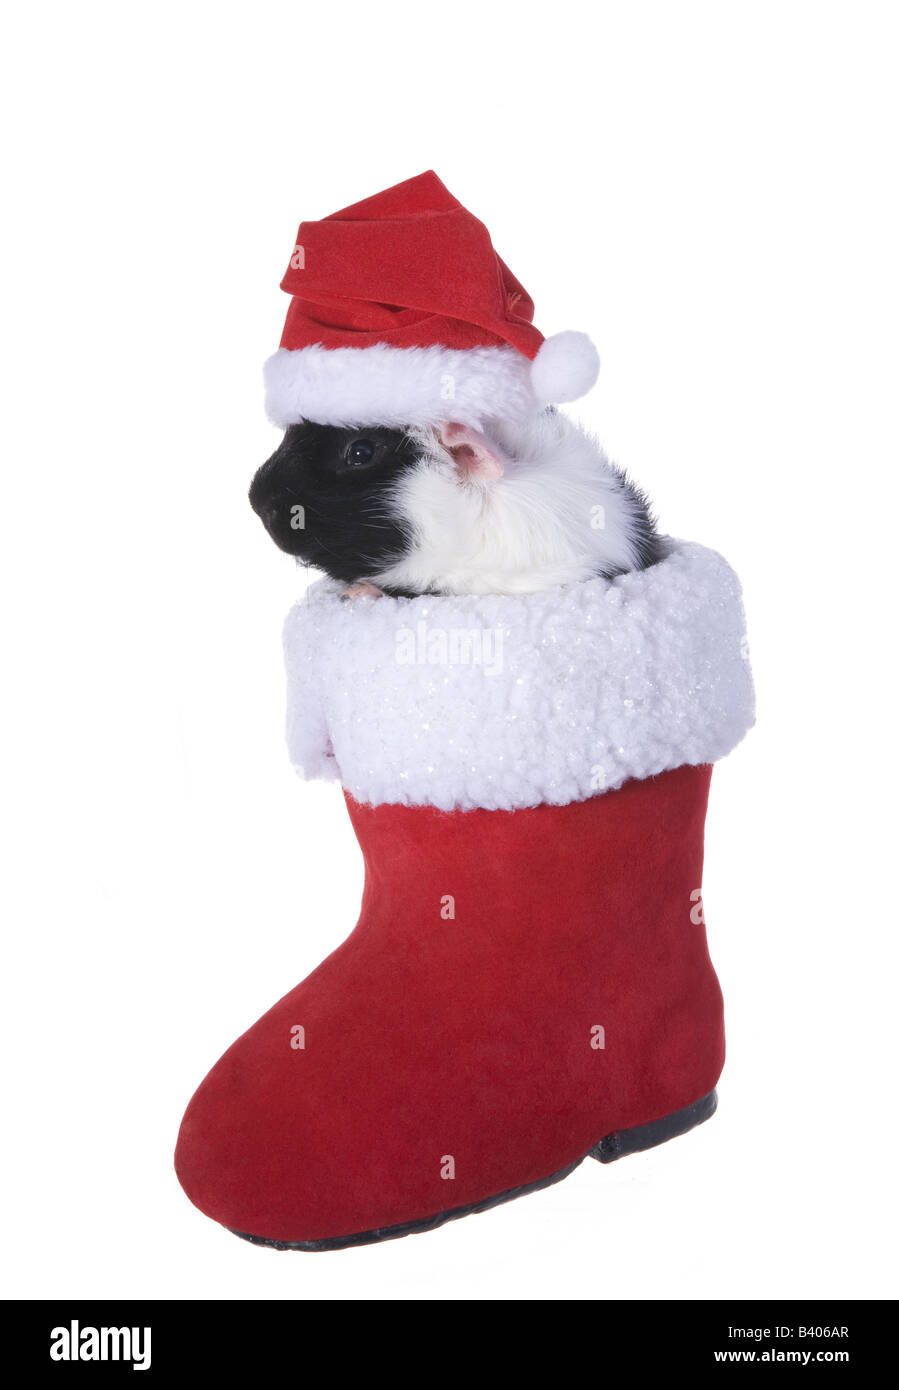 Cute Black and white Christmas Guinea pig or Cavy inside Santa s boot wearing Christmas hat isolated on white background Stock Photo